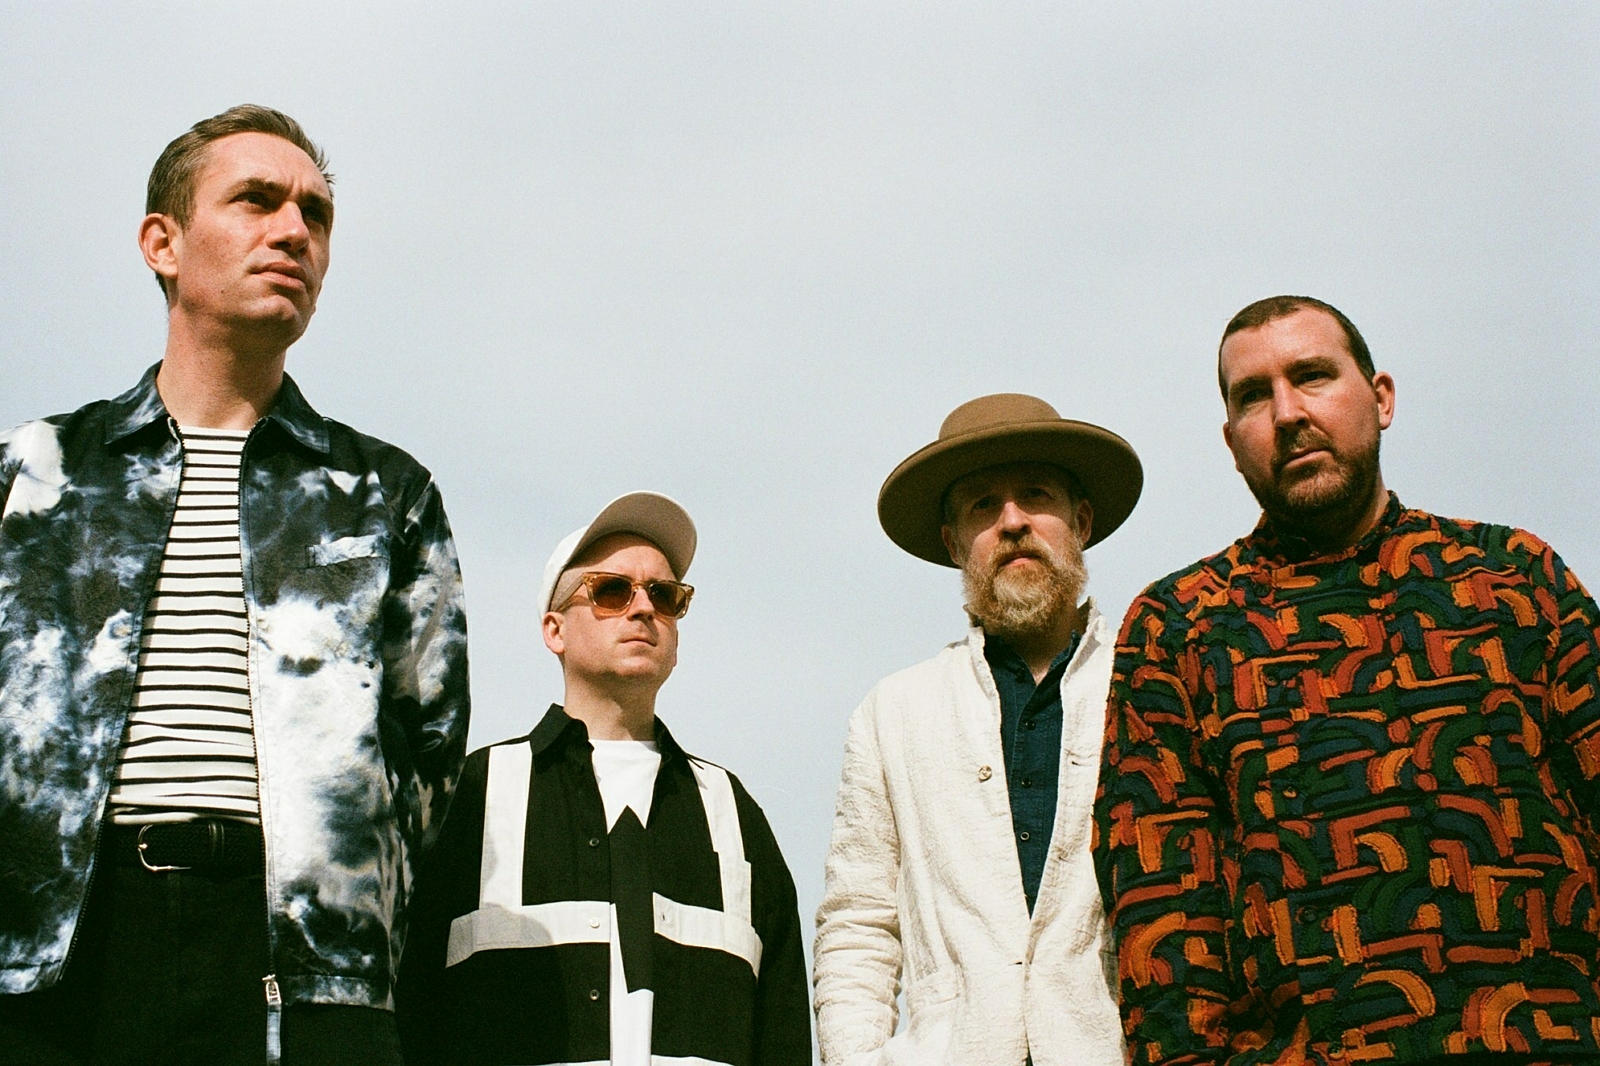 Hot Chip announce new album 'Freakout/Release'